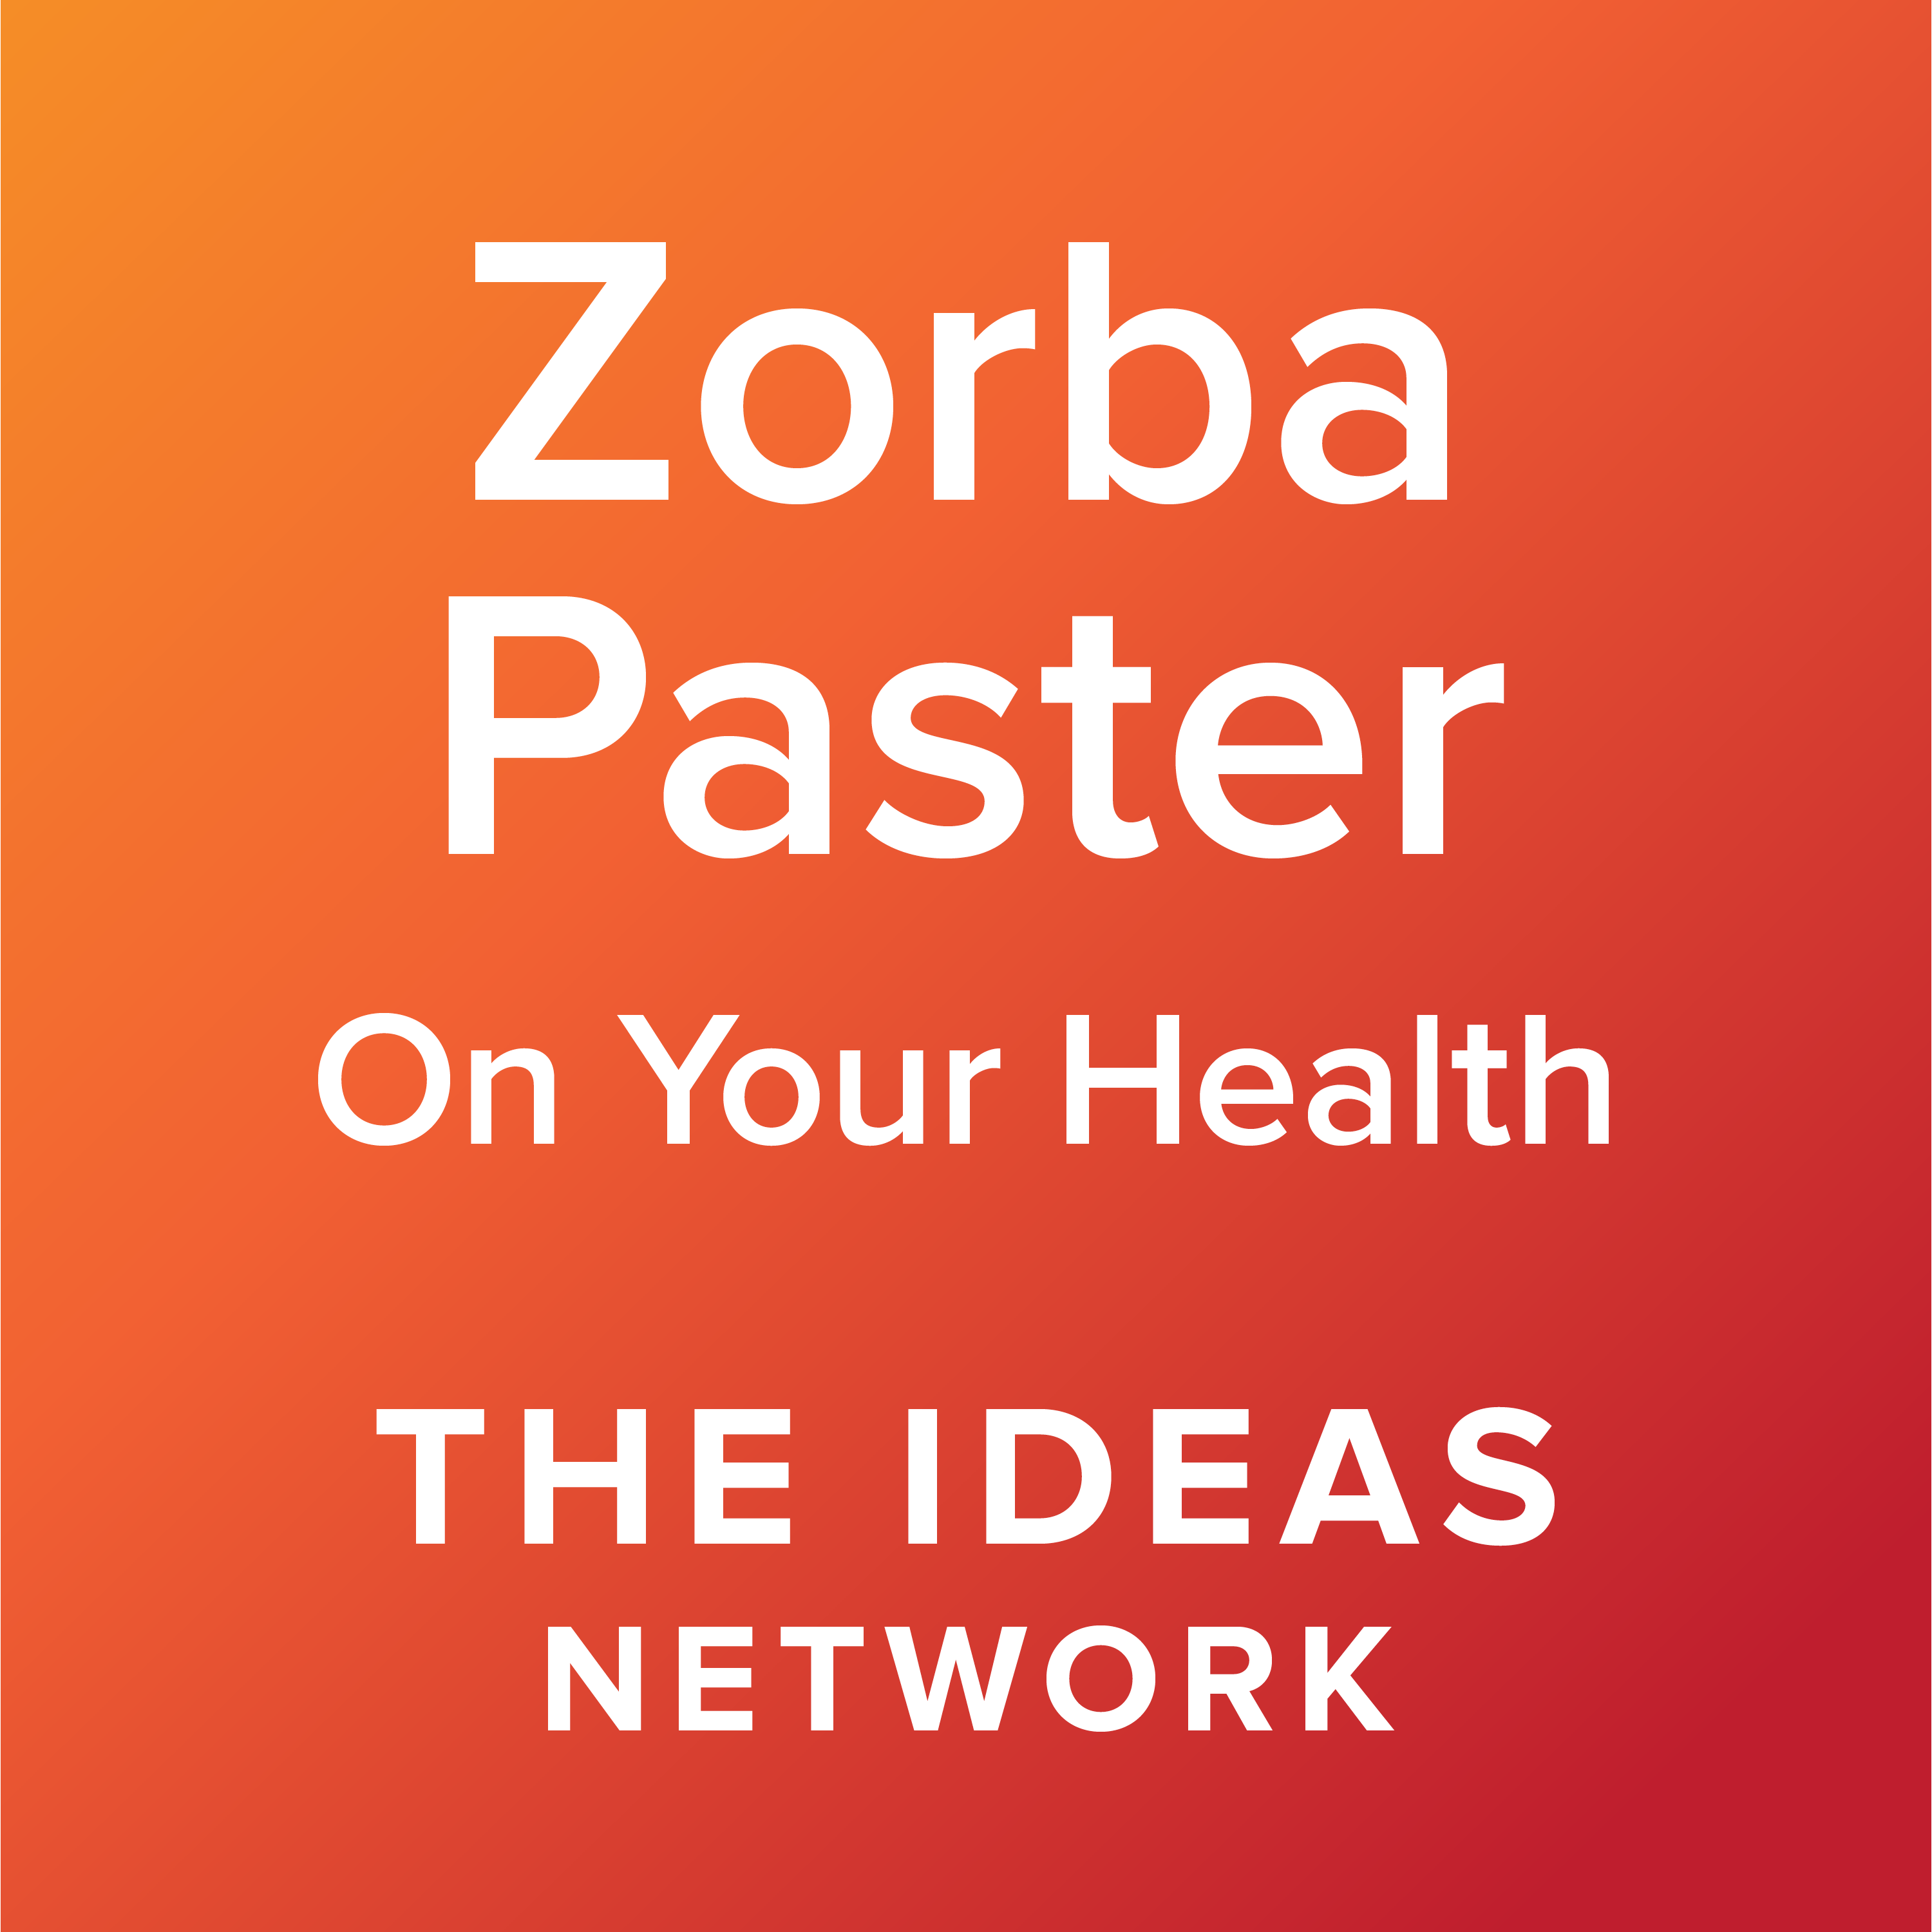 Zorba Paster On Your Health